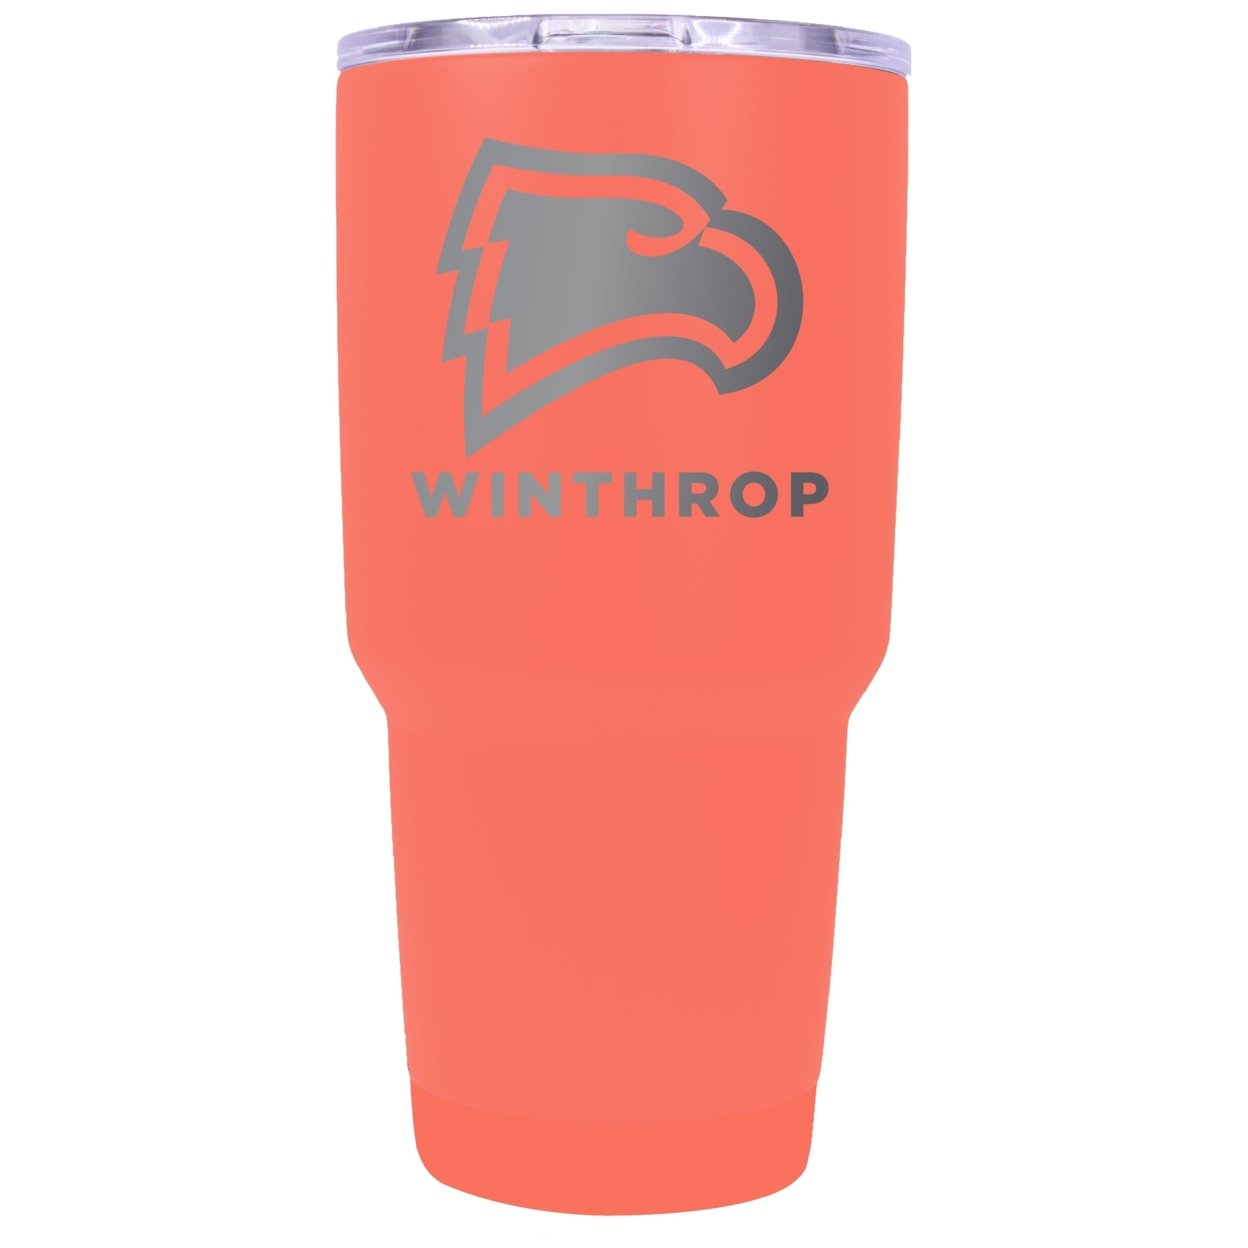 Winthrop University 24 Oz Laser Engraved Stainless Steel Insulated Tumbler - Choose Your Color. - Coral